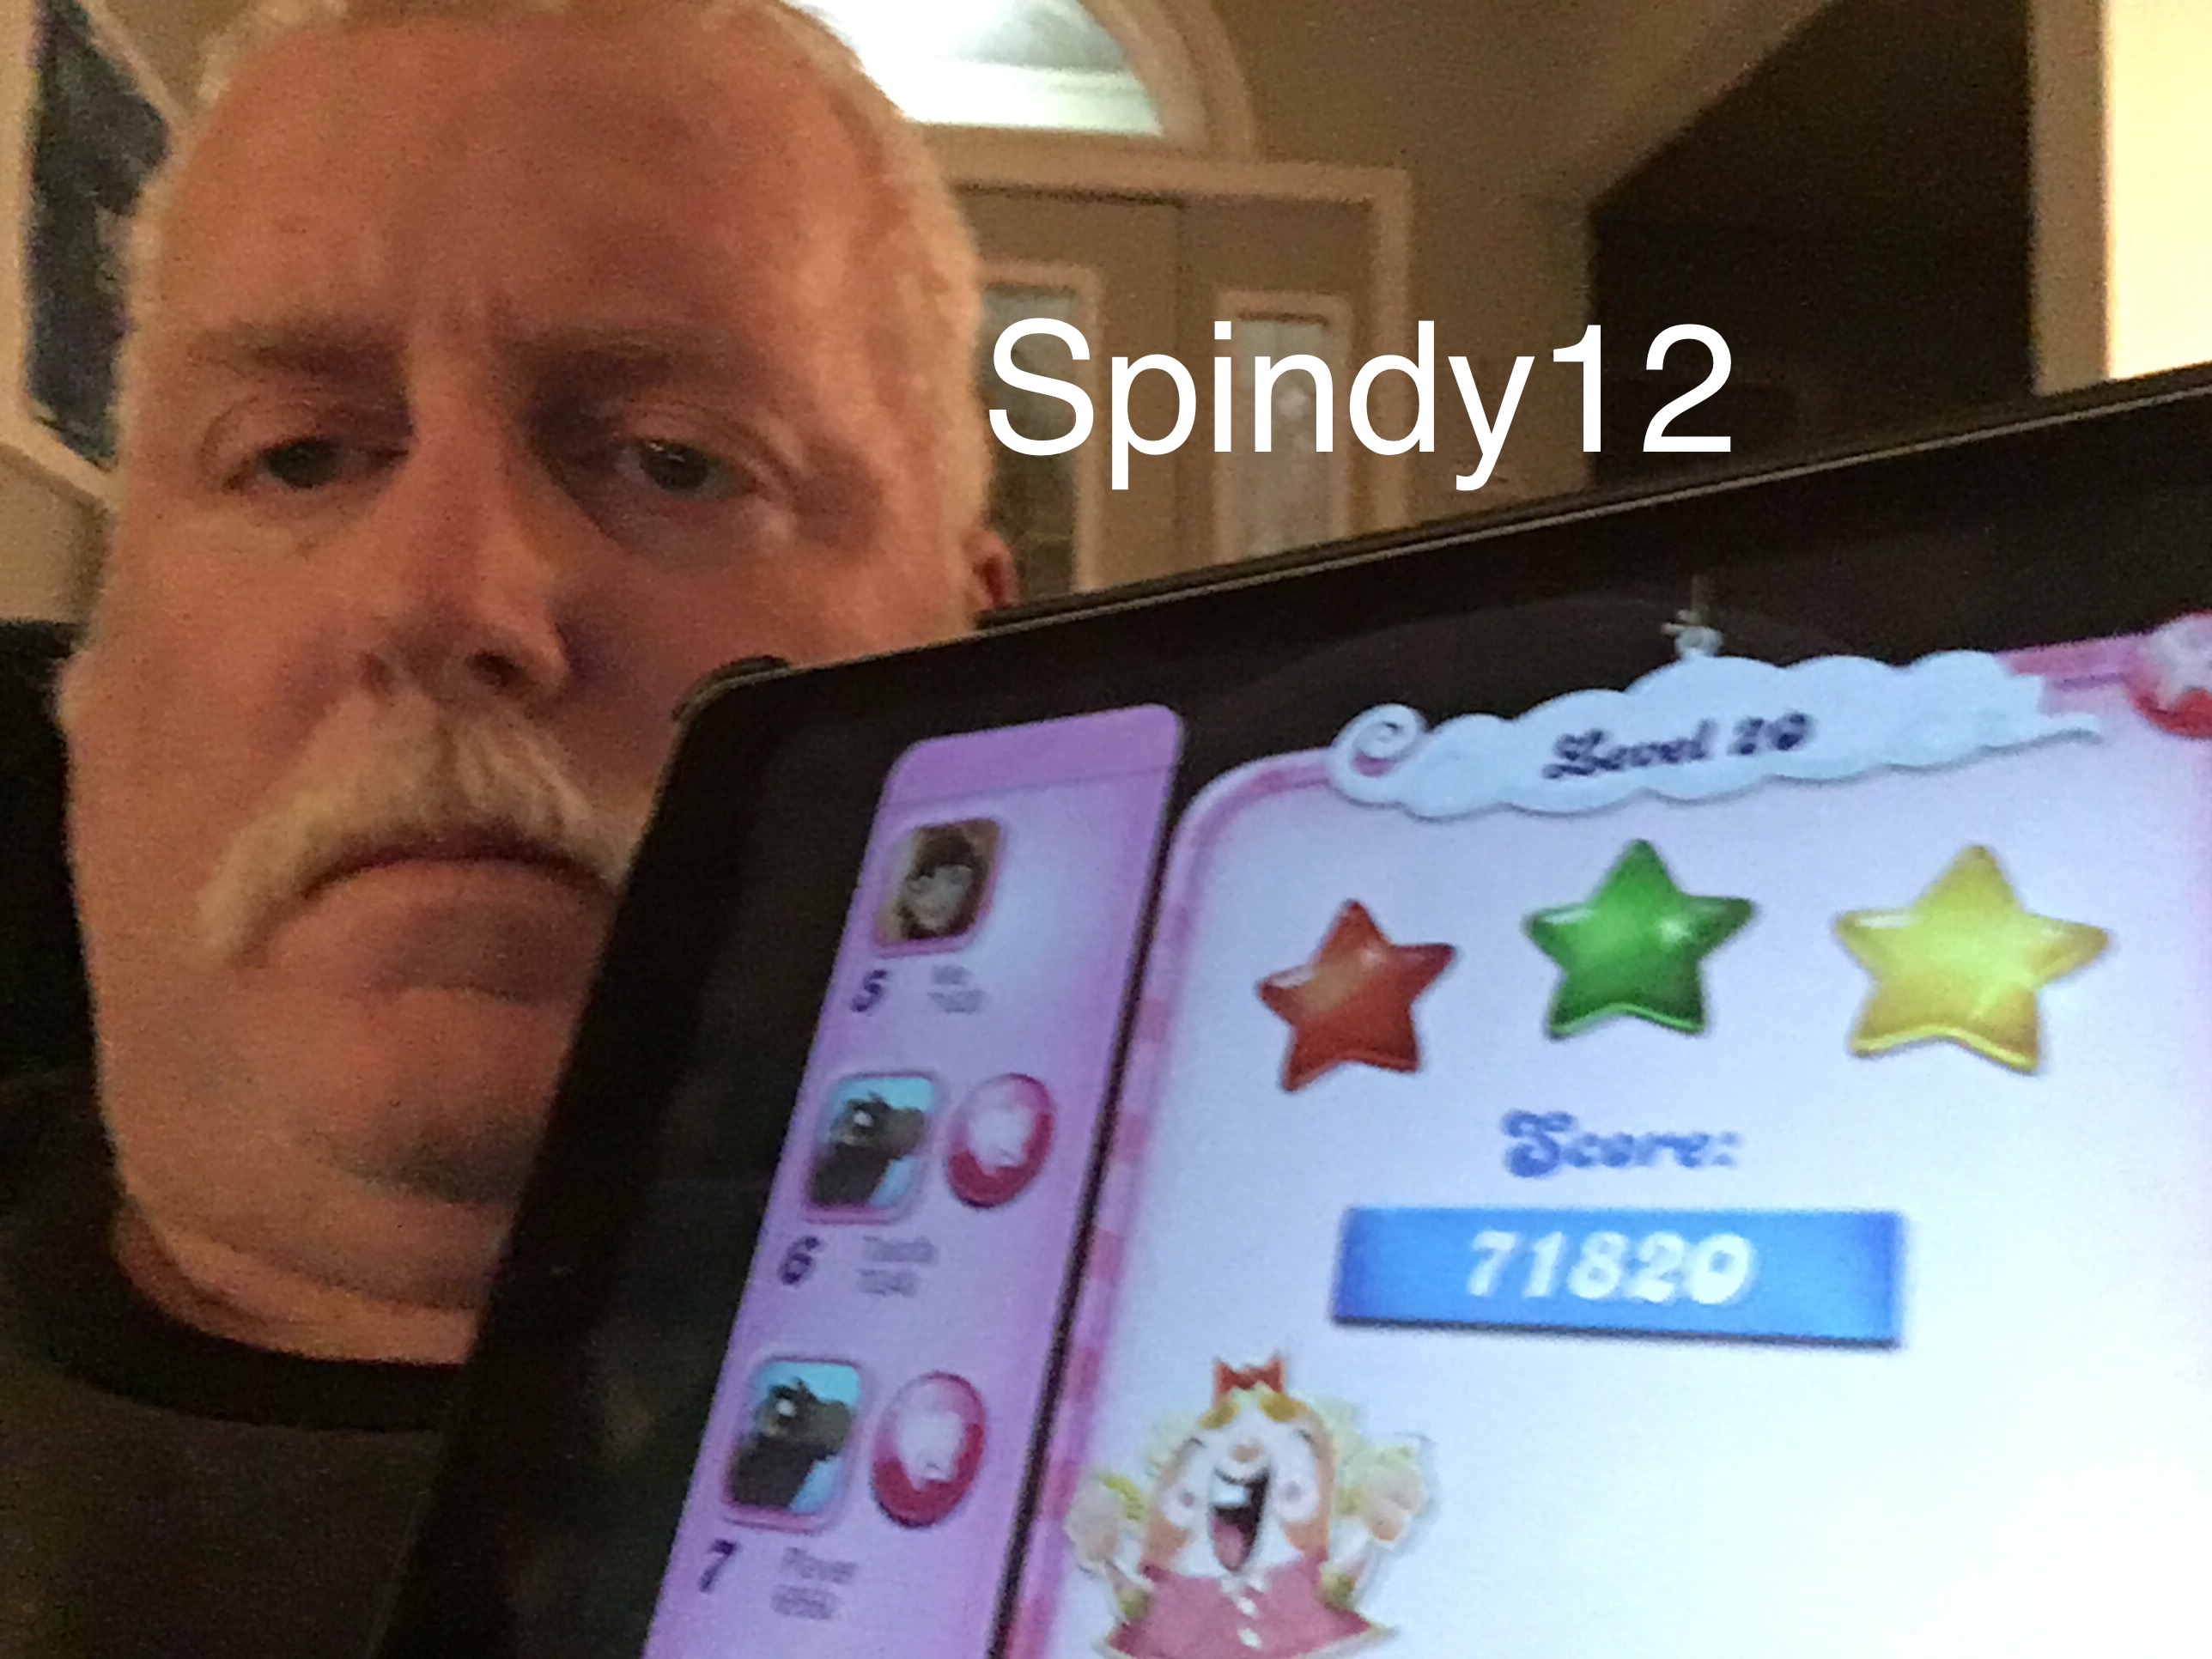 Spindy12: Candy Crush Saga: Level 020 (iOS) 71,820 points on 2016-12-21 17:18:50